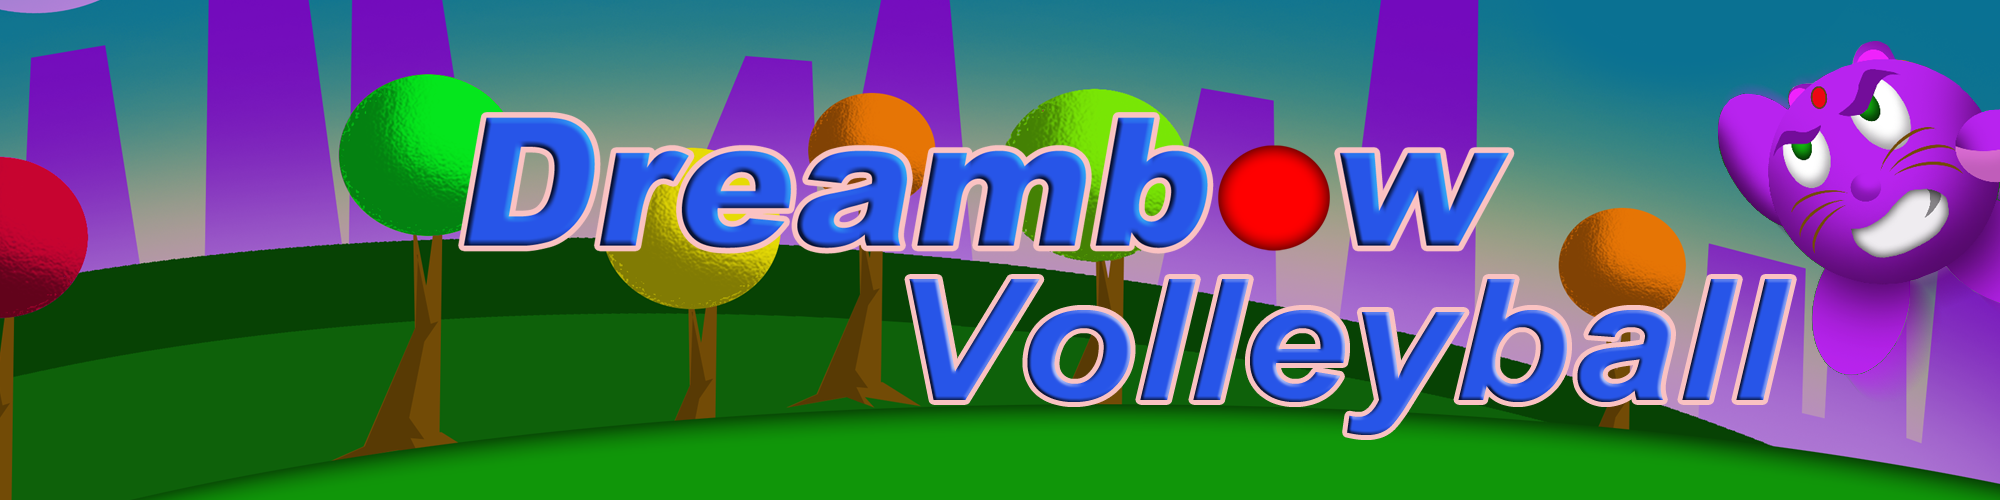 Dreambow Volleyball